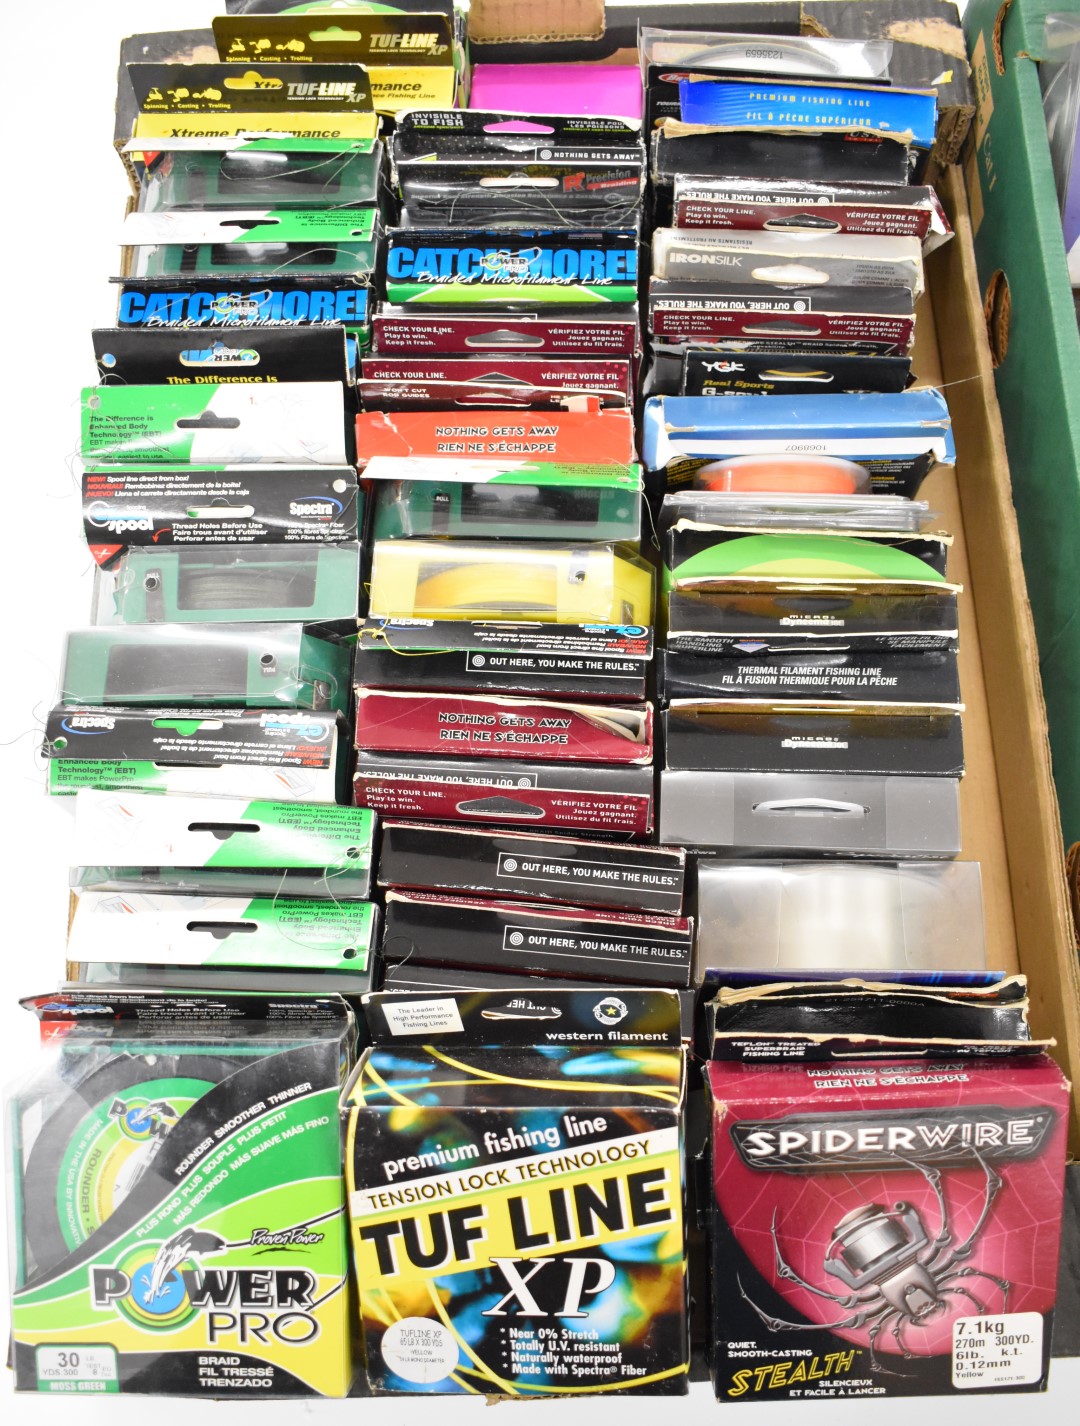 Large quantity of braid and mono fishing line by Penn, Stealth, Power Pro etc, in two trays - Image 2 of 3